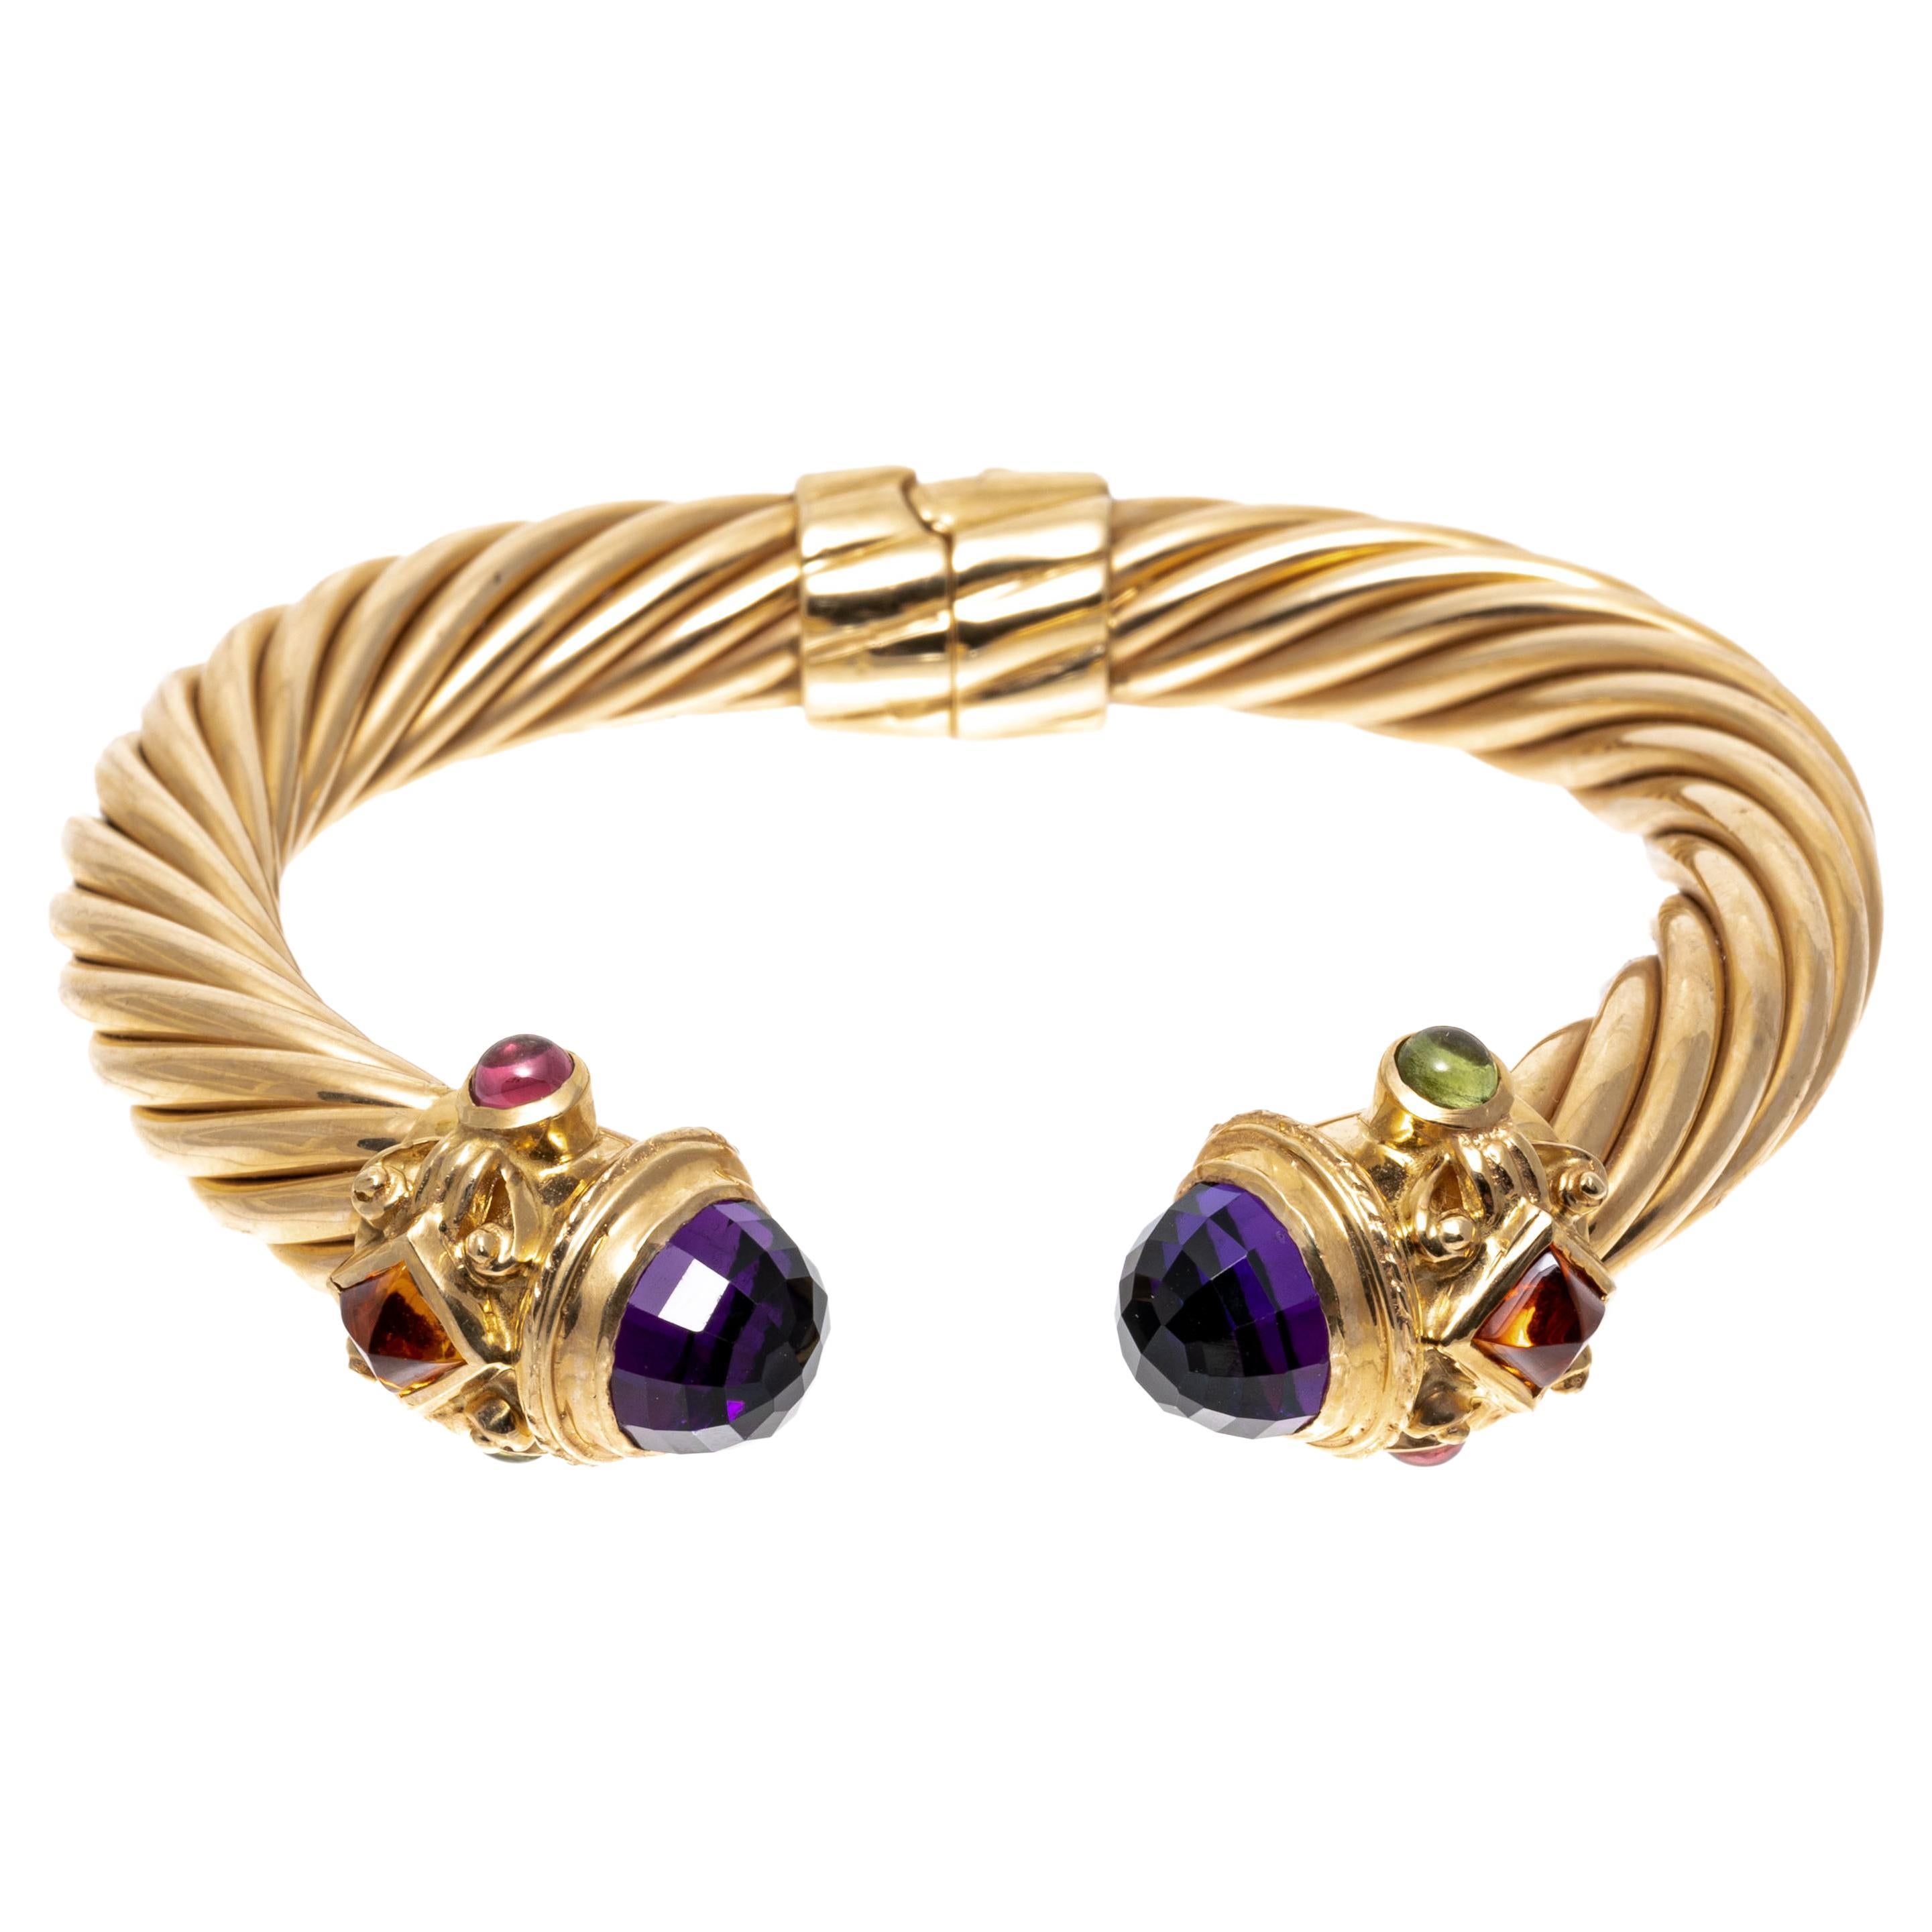 14k Ribbed Hinged Cuff Bangle Bracelet with Amethysts, Tourmalines and Citrines